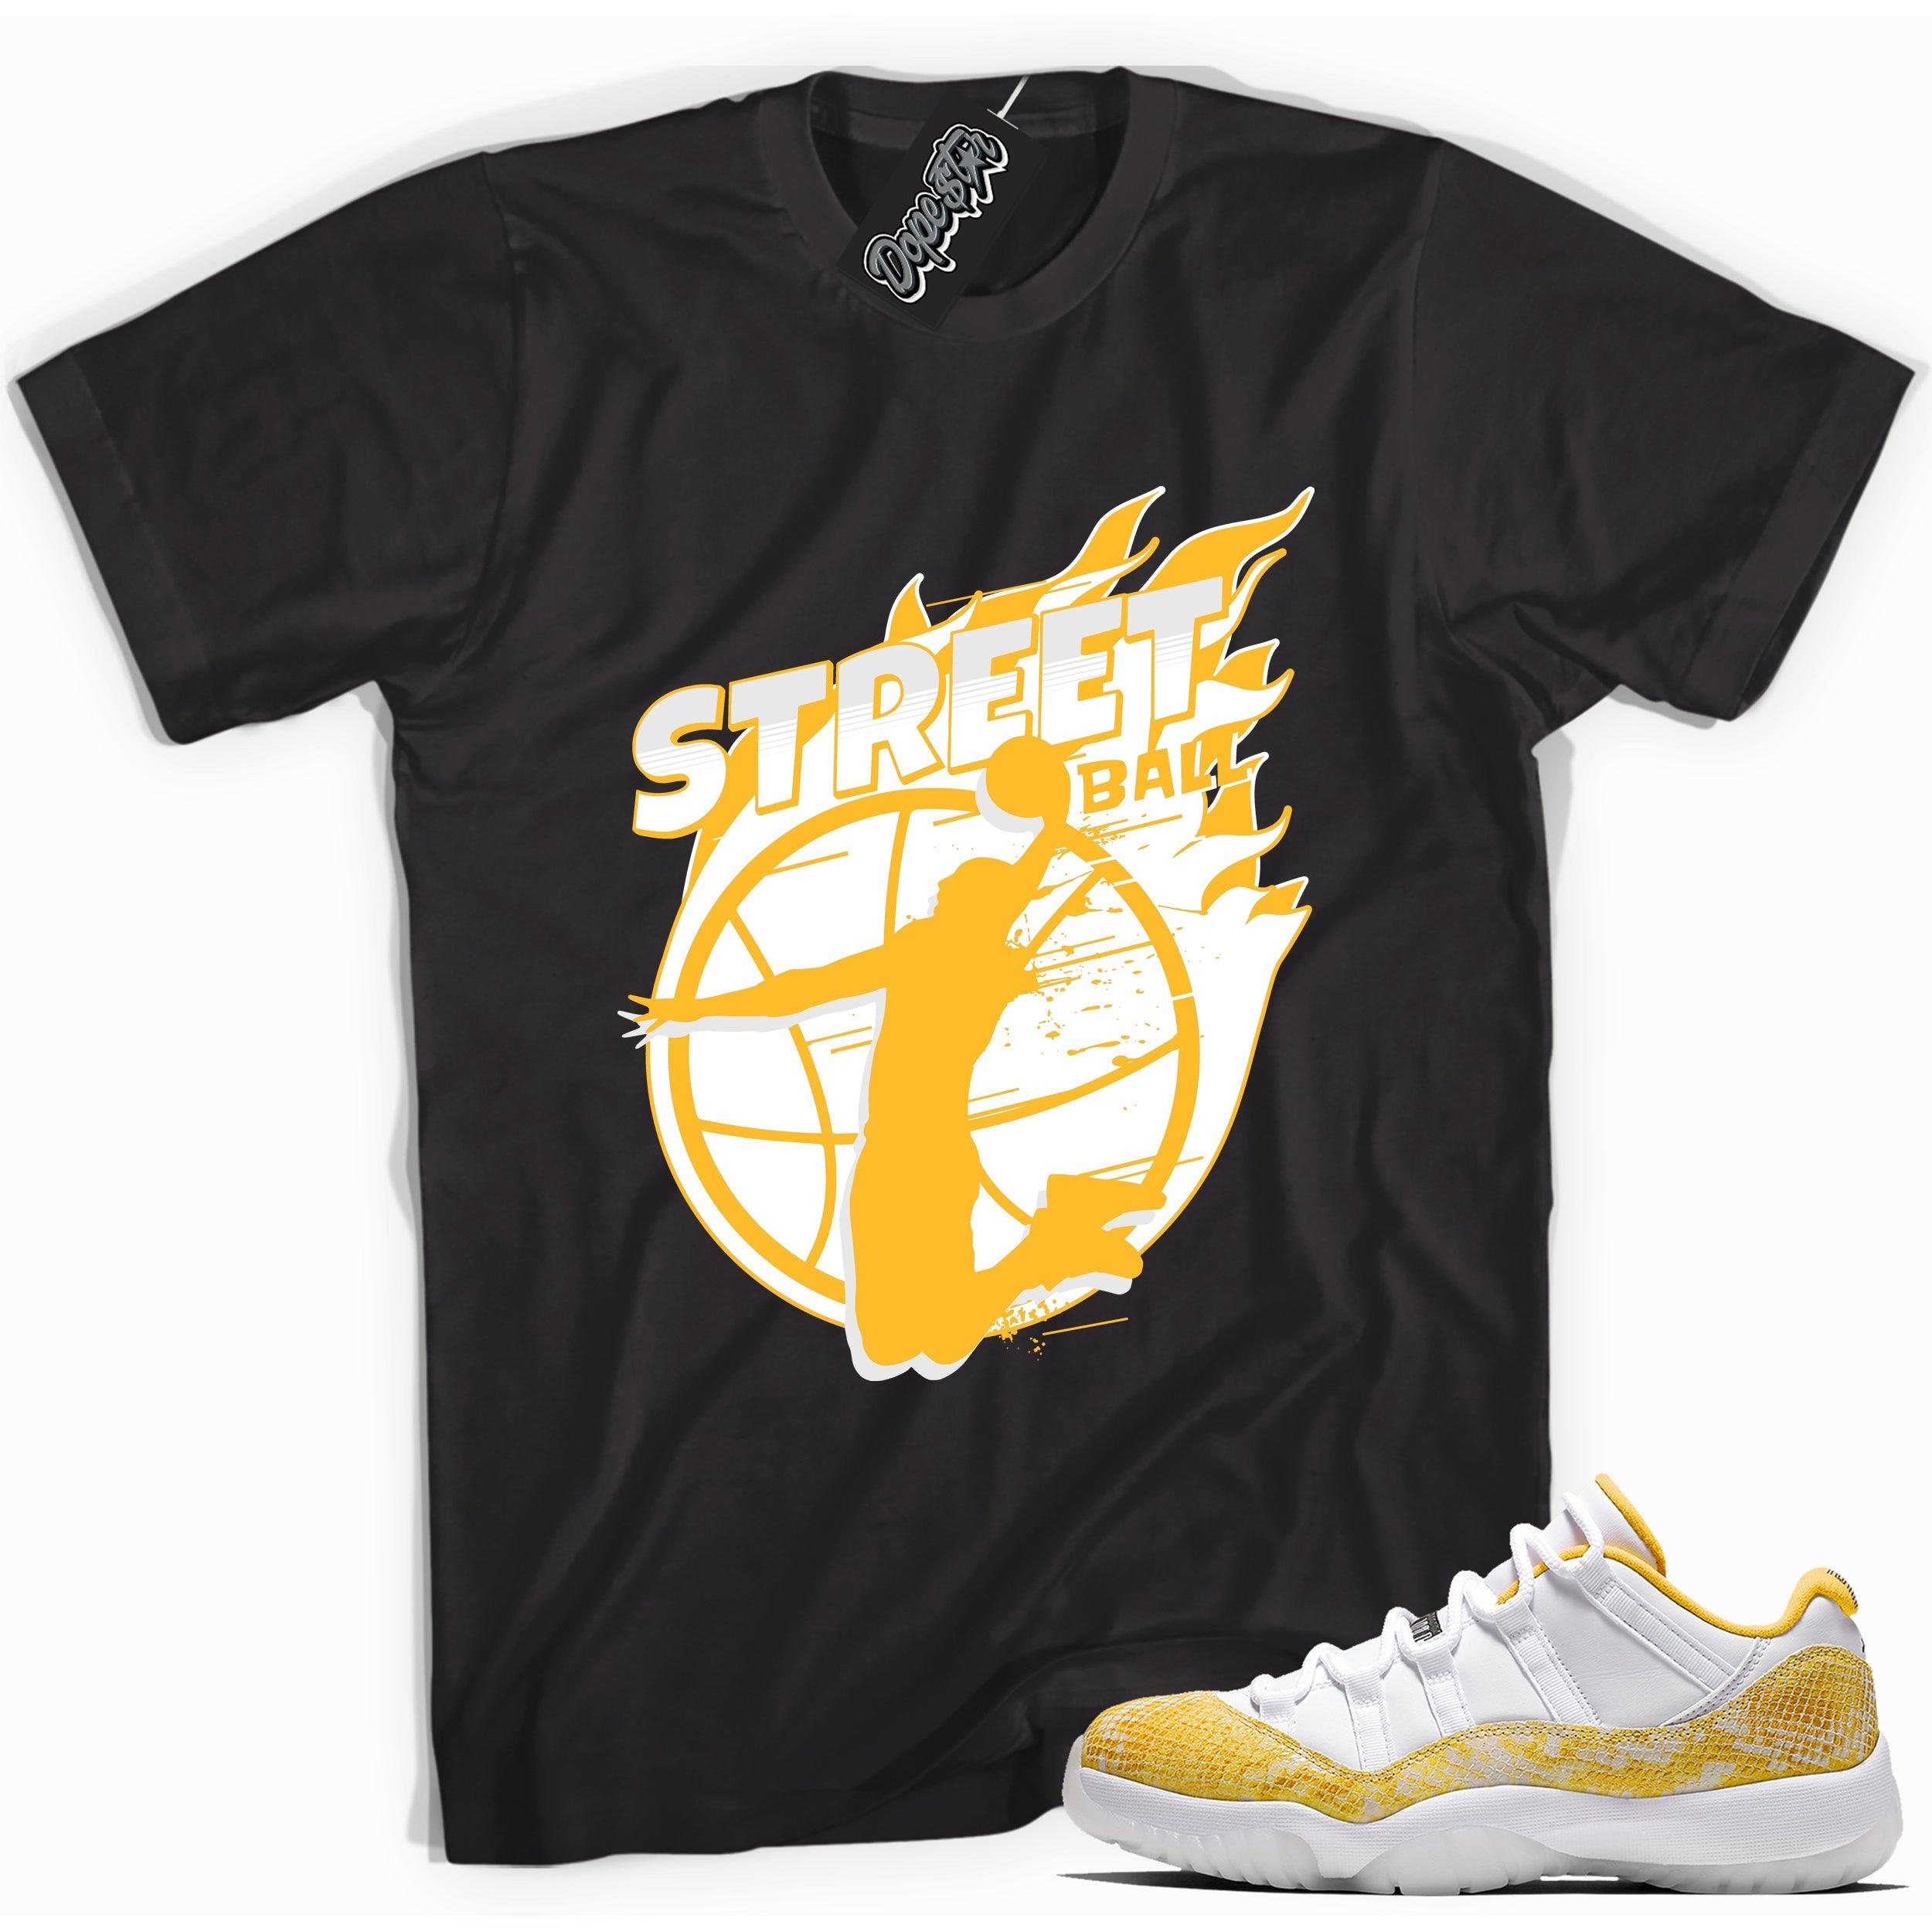 Cool black graphic tee with 'street ball' print, that perfectly matches  Air Jordan 11 Retro Low Yellow Snakeskin sneakers